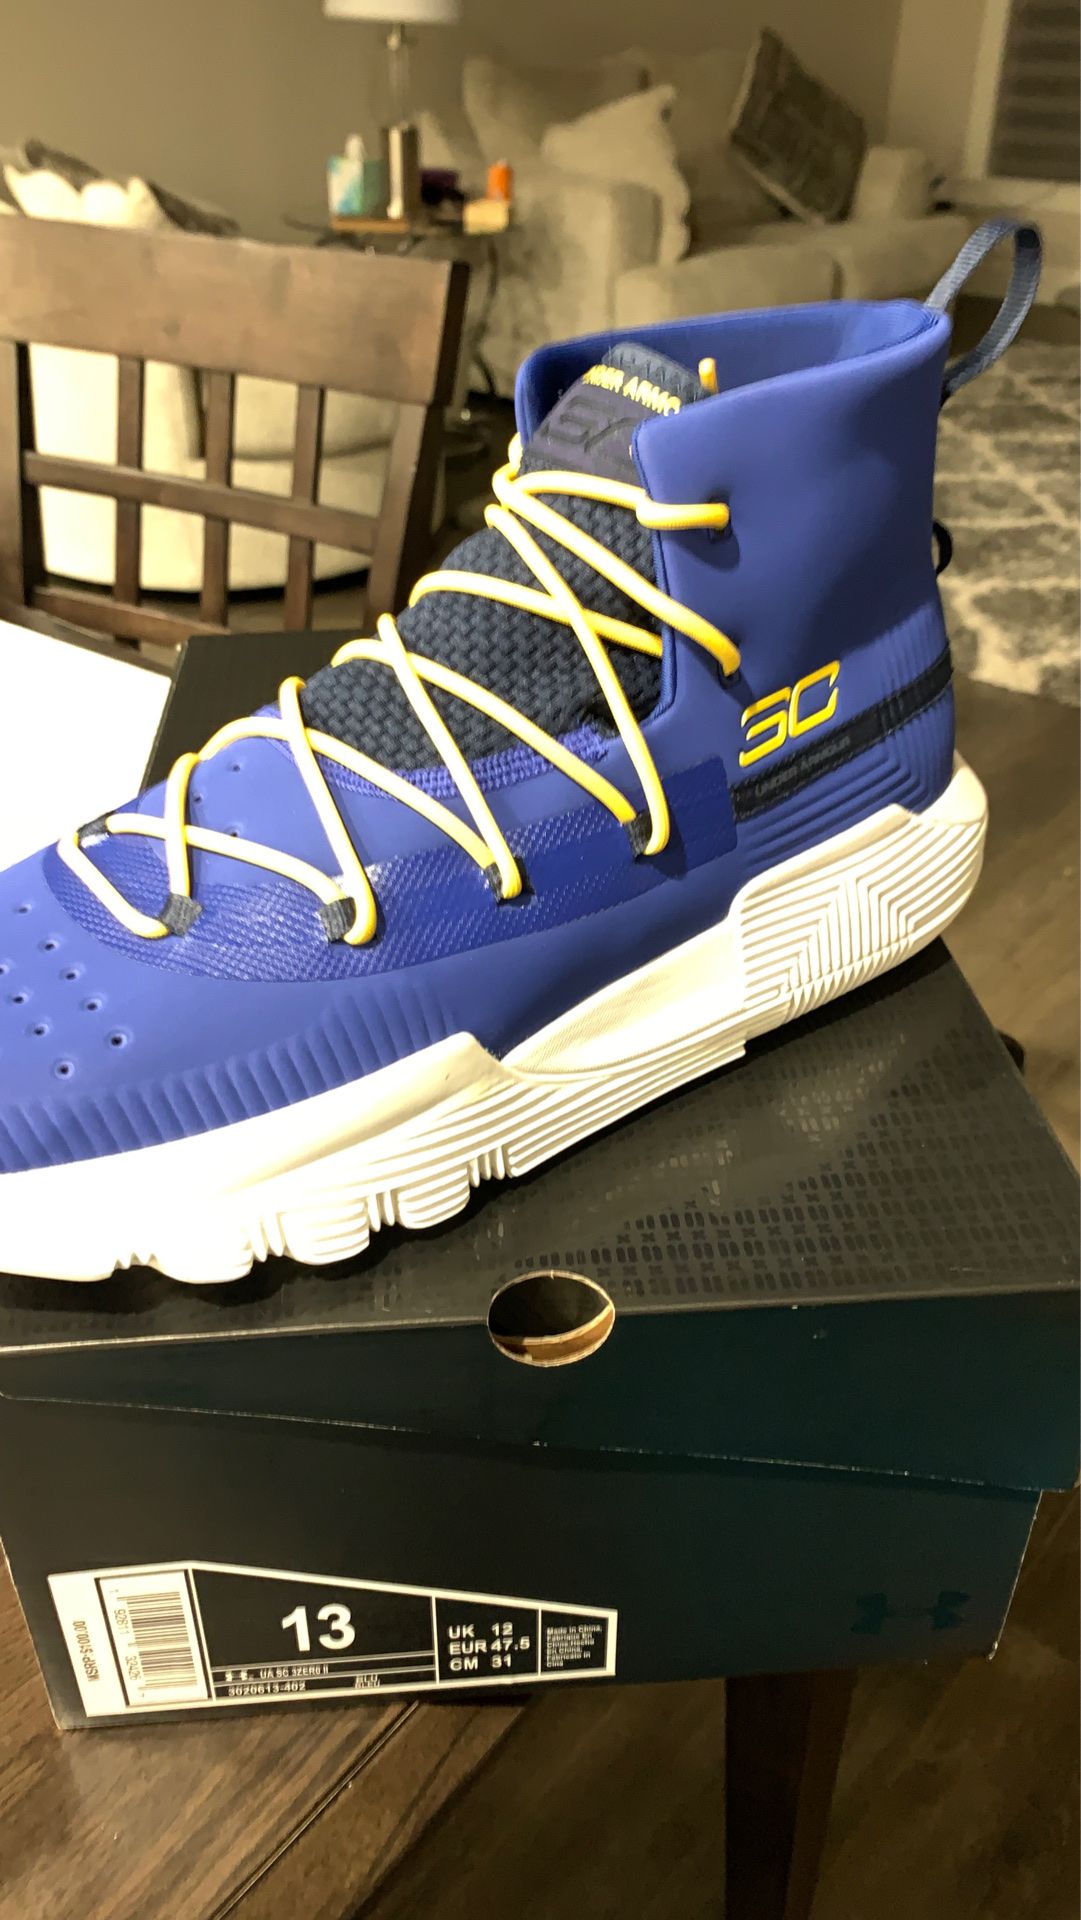 Steph Curry 3ZERO 2 shoes size 13